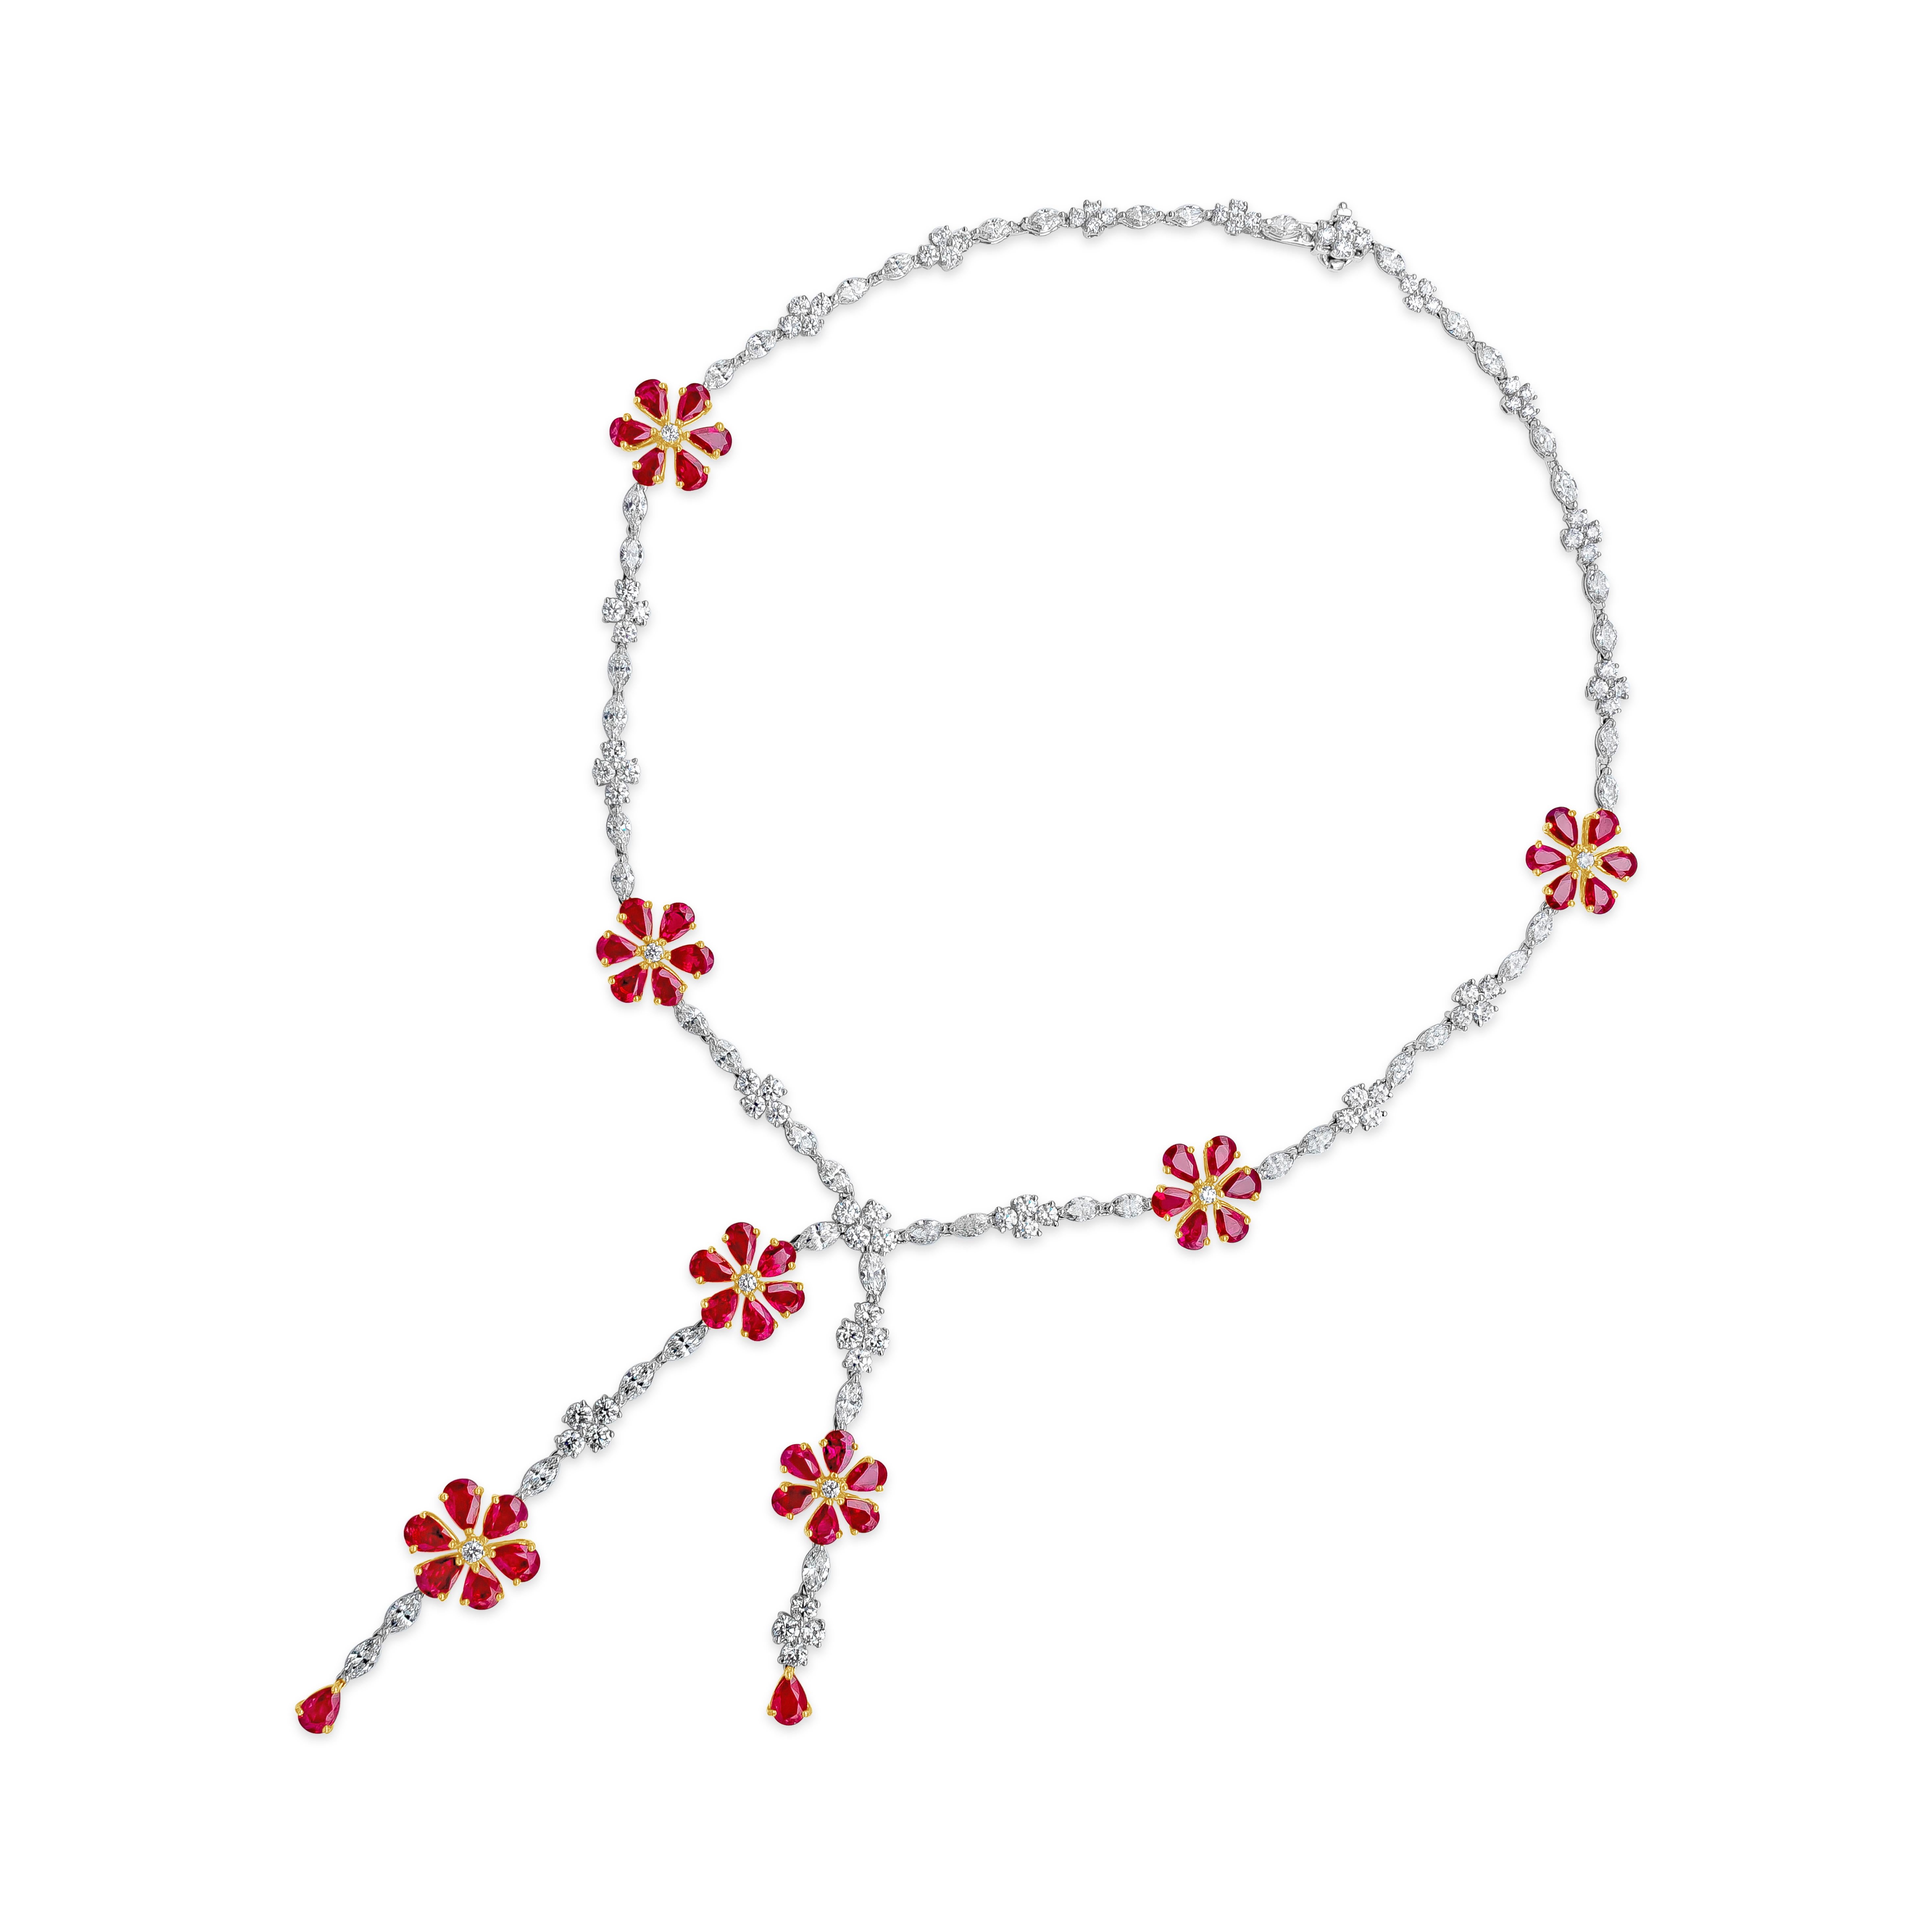 Contemporary Roman Malakov 41.90 Carats Total Mix-Cut Ruby and Diamond Flower-Motif Necklace